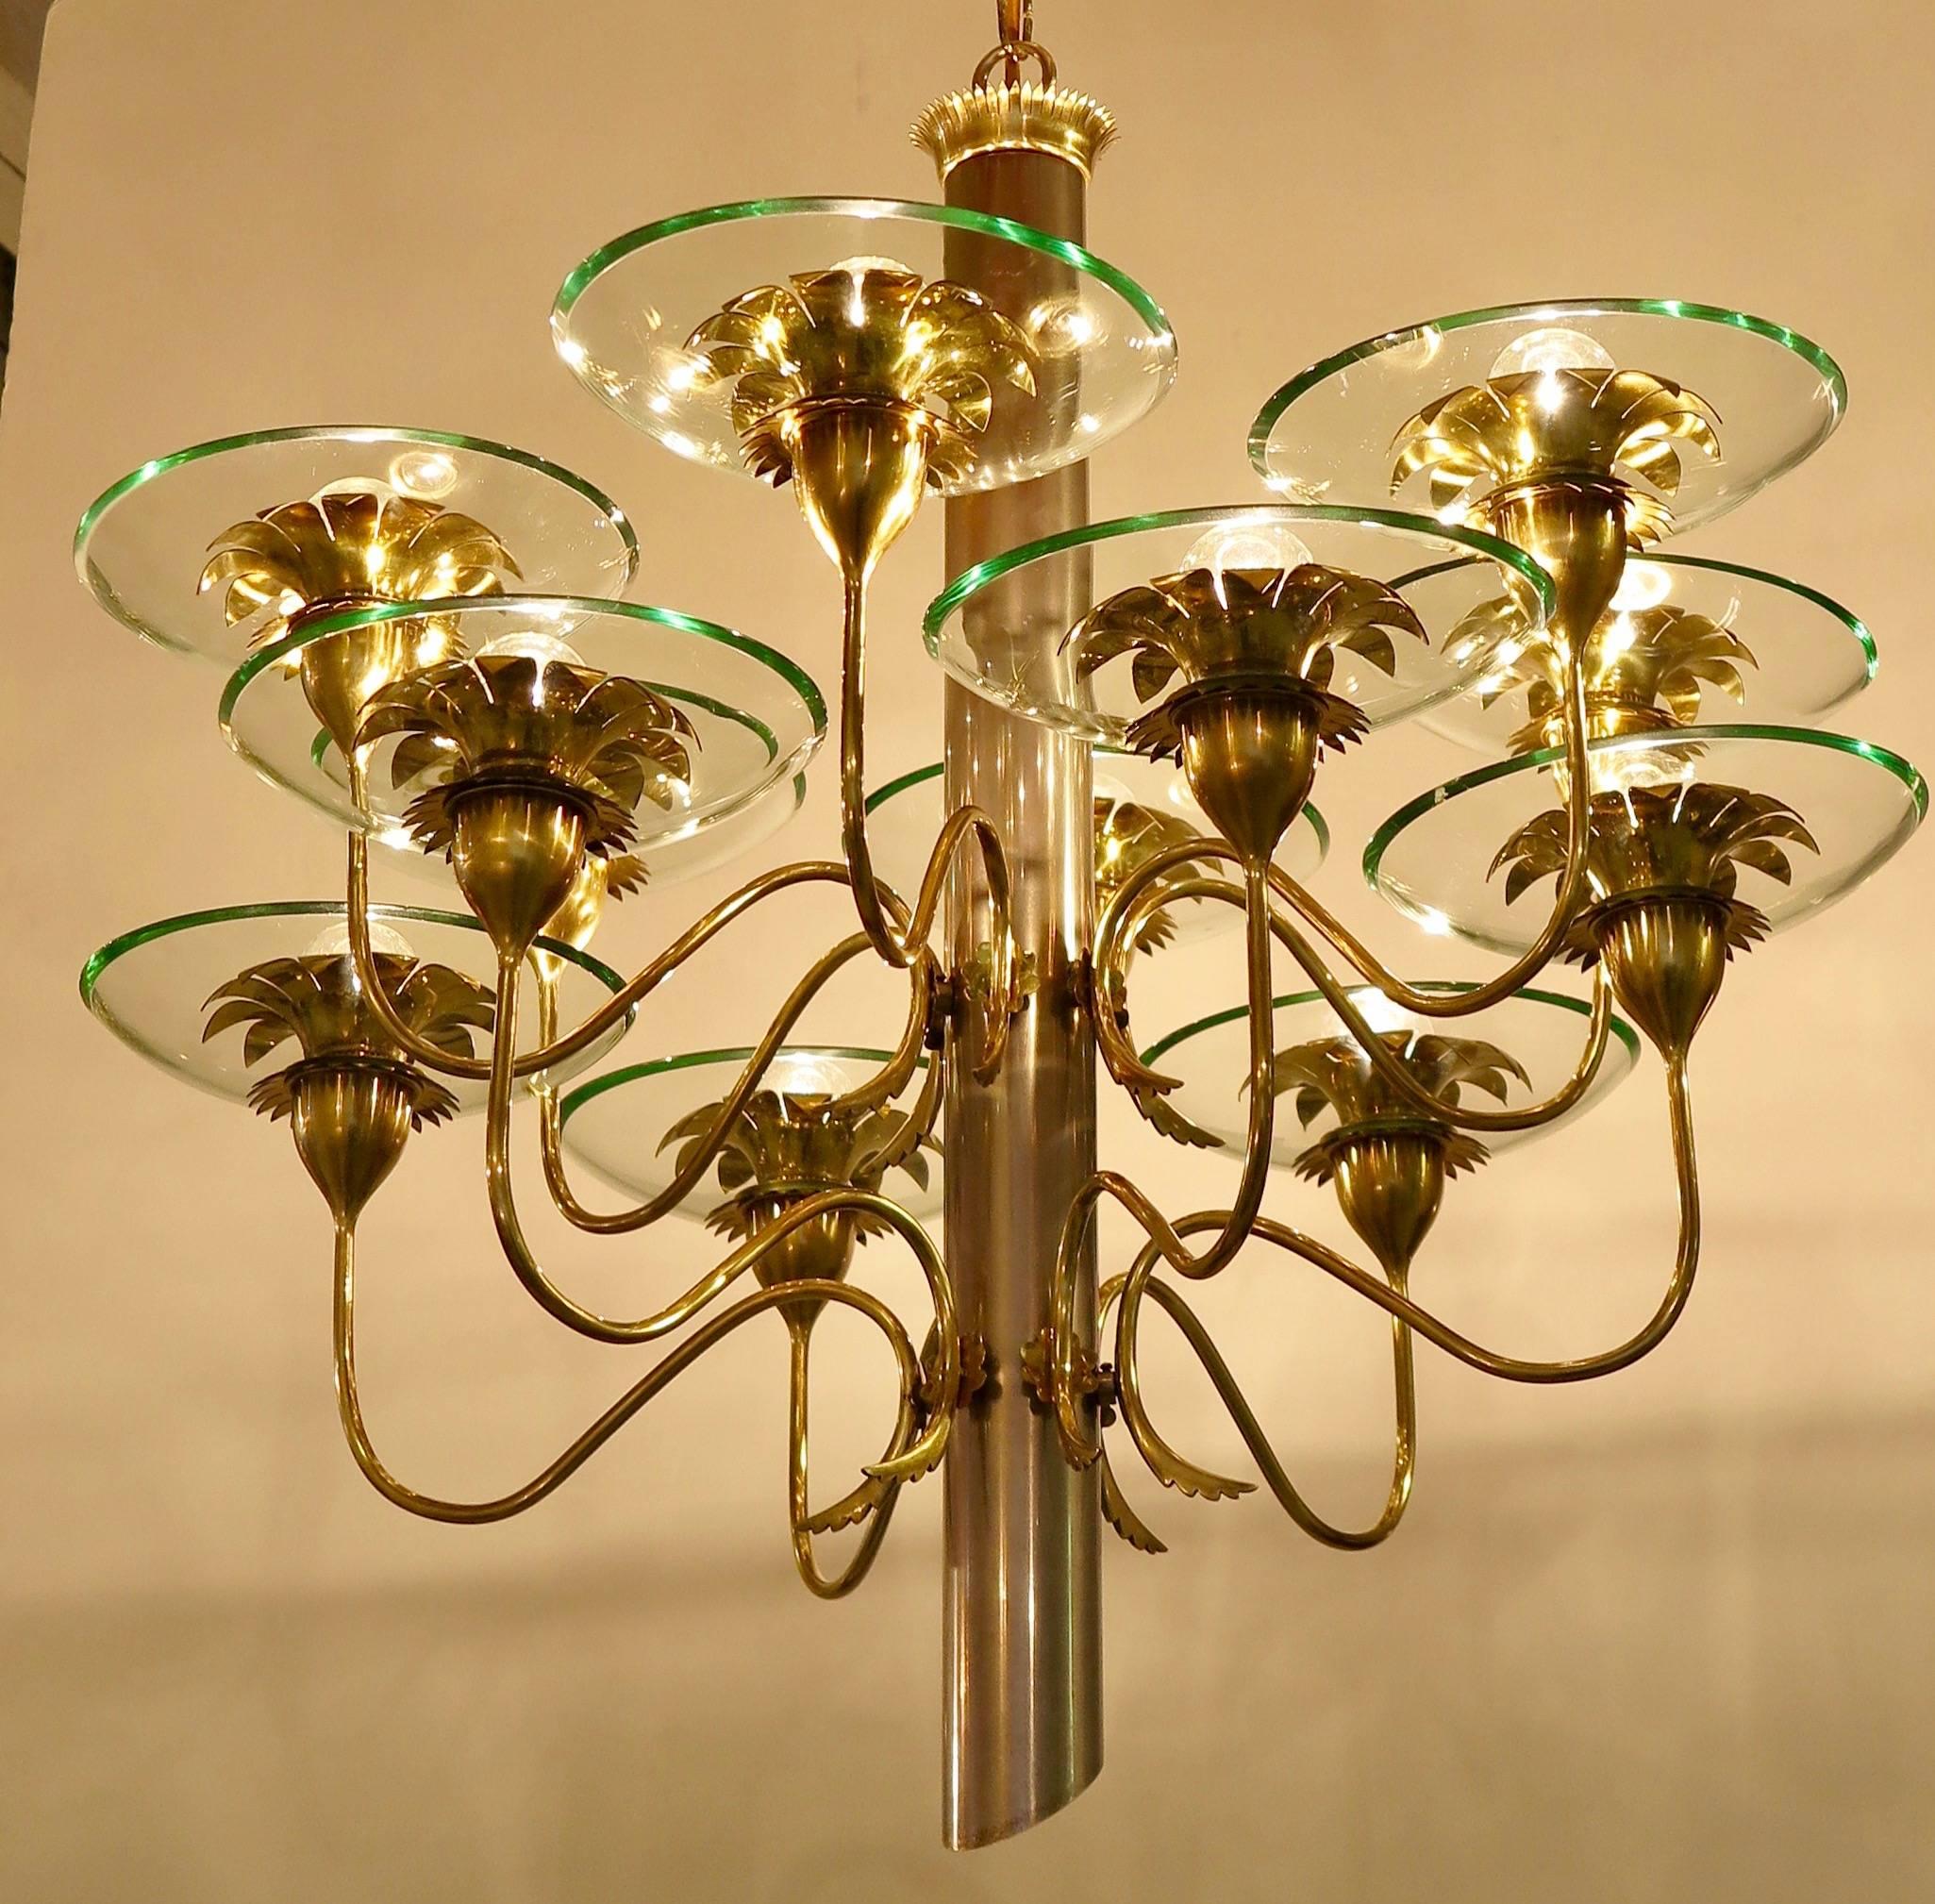 Twelve-arm chandelier in brass, chrome and glass by Pietro Chiesa for Fontana Arte designed for a villa in Milano by Osvaldo Borsani, circa 1947.
The chandelier is published in the Osvaldo Borsani book.